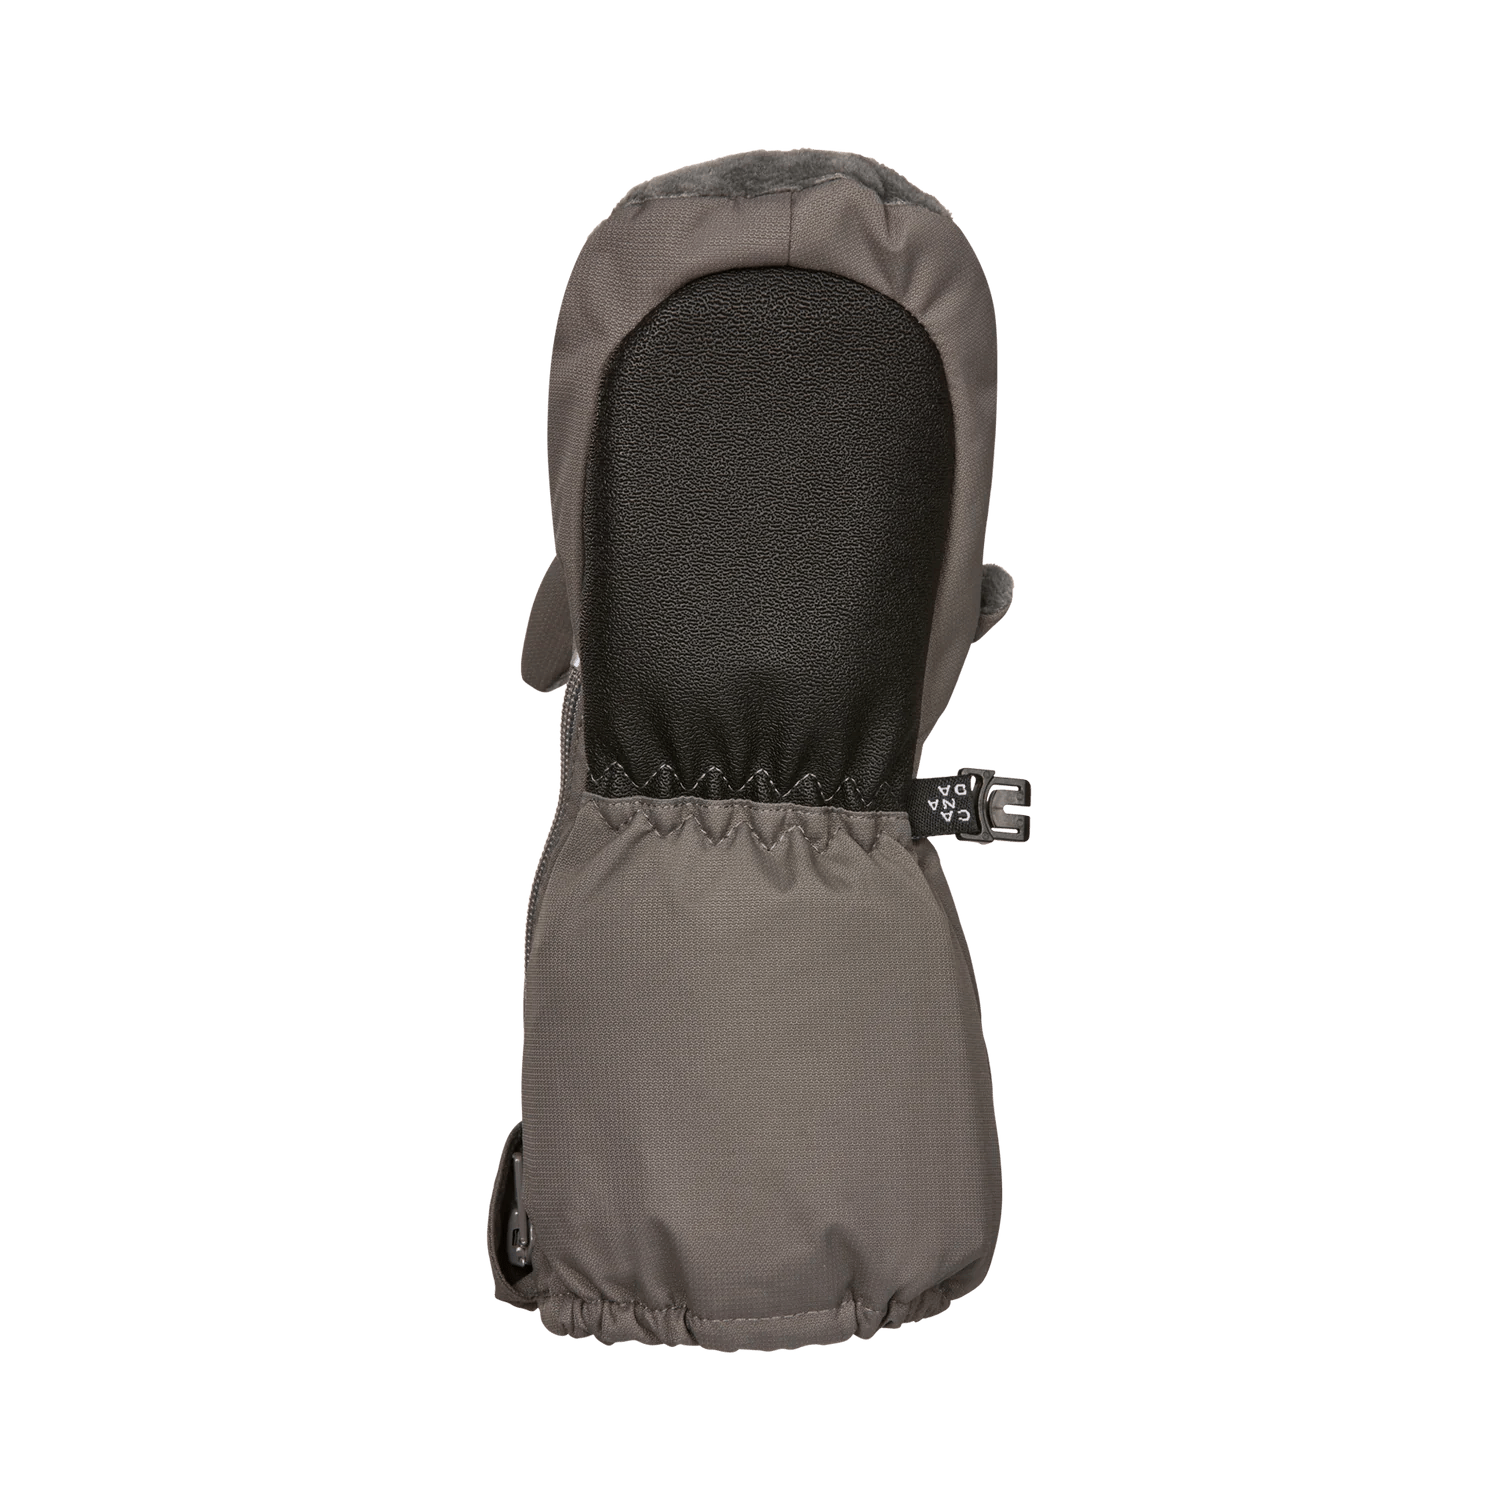 Kombi The Sherpa Animal Infant Mitts - Mountain Kids Outfitters